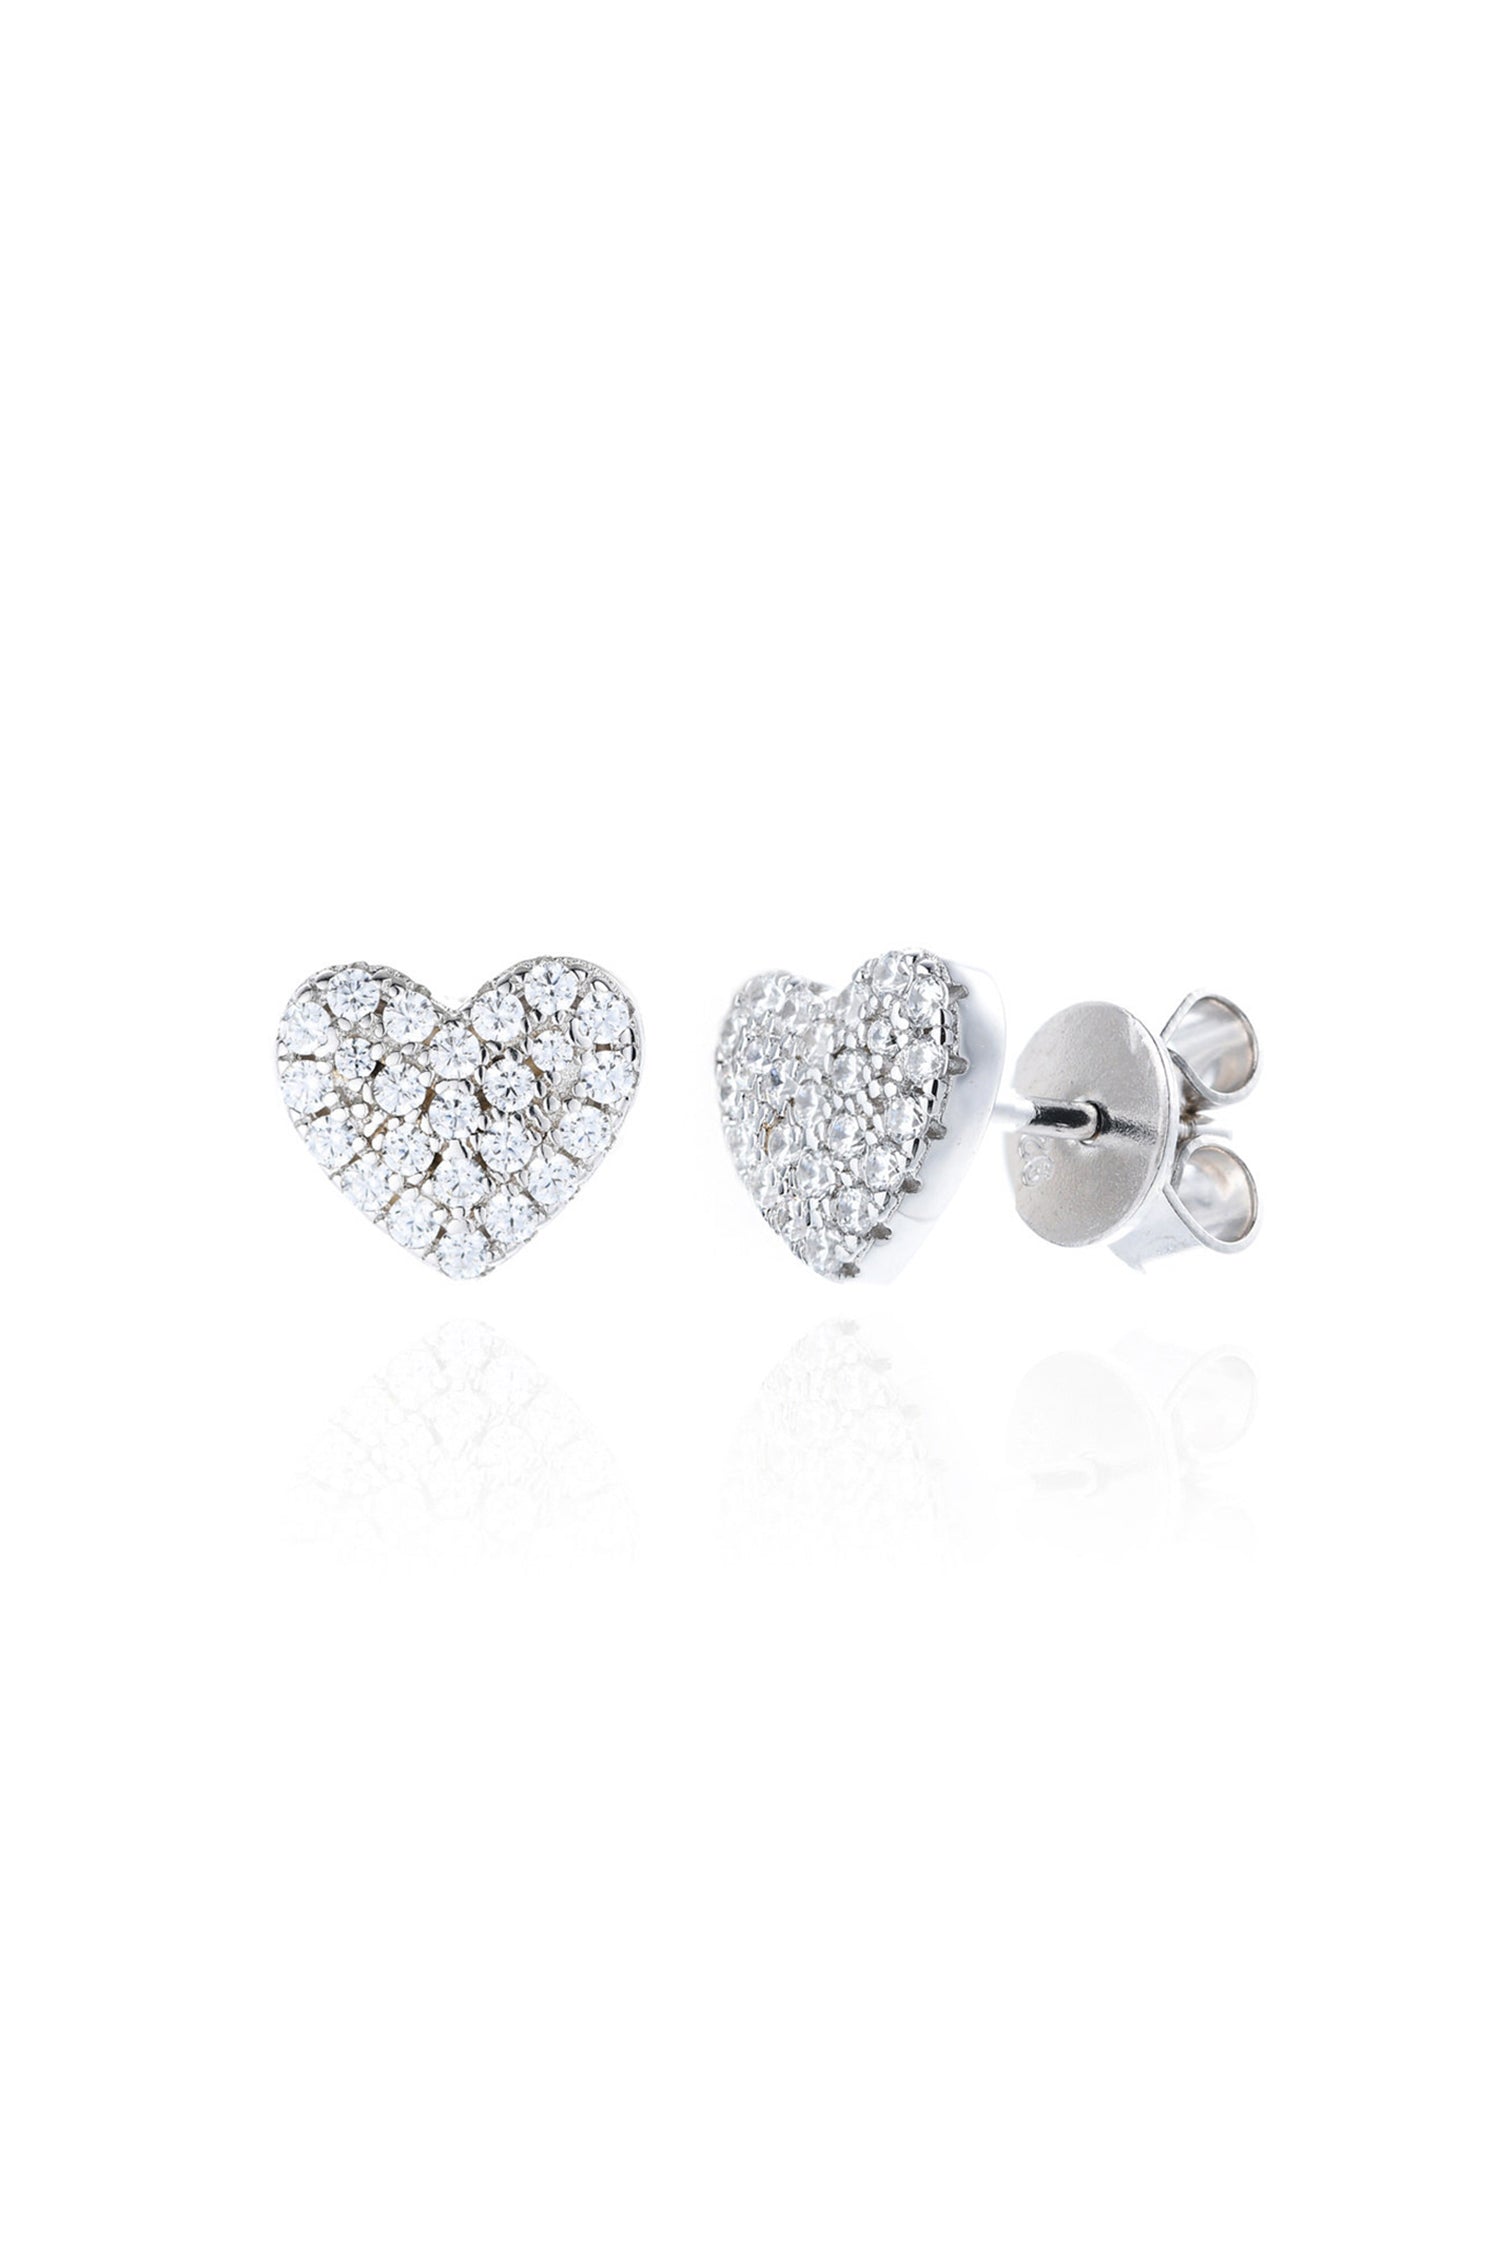   Pave Heart Stud Earrings Sterling Silver White Background